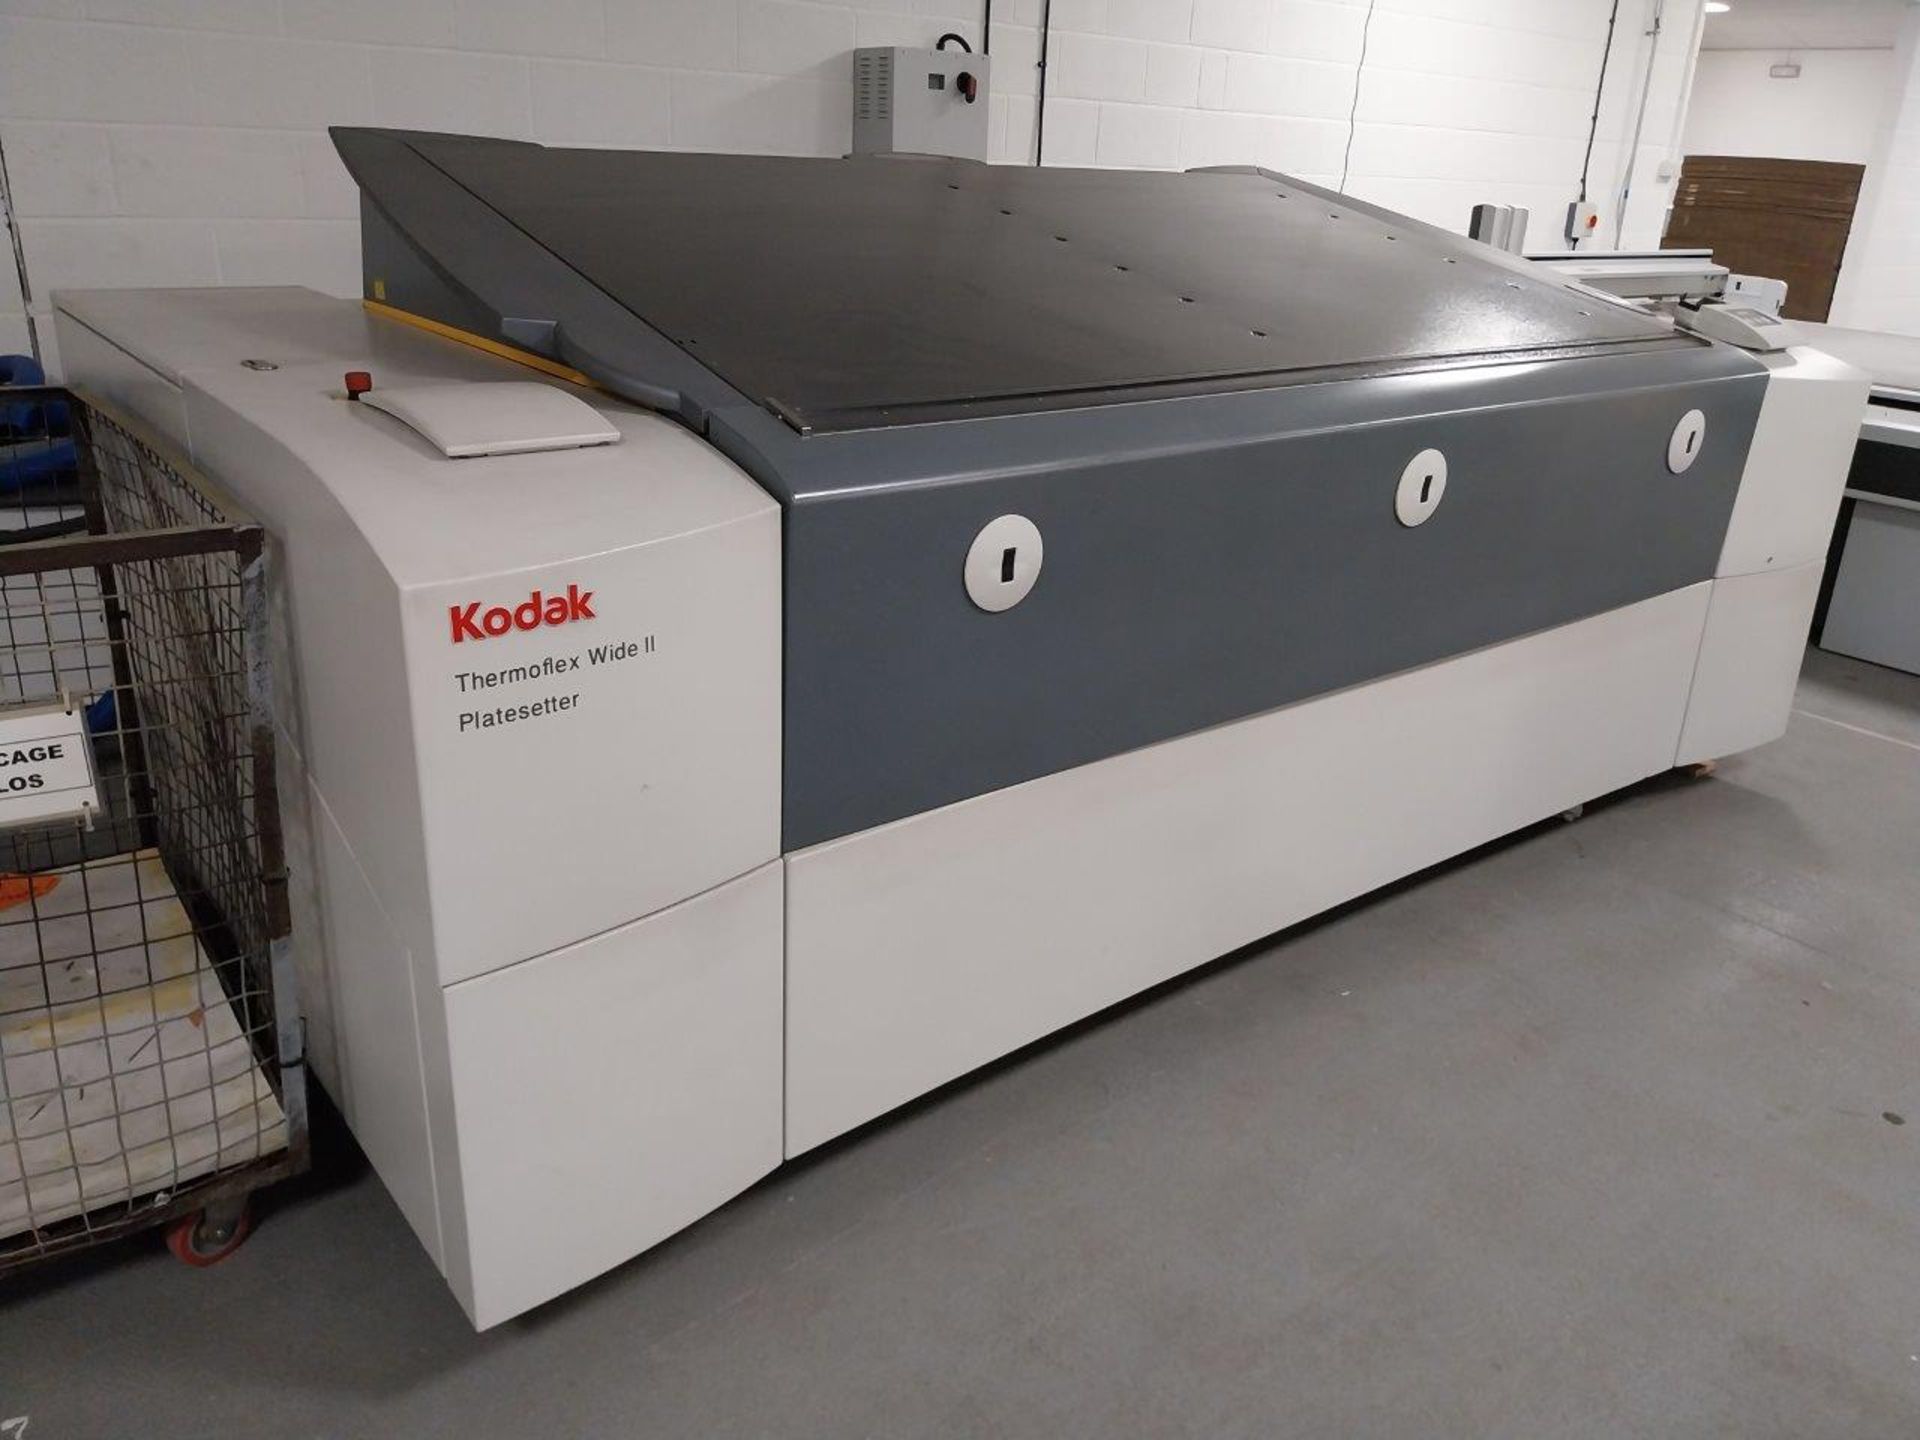 Kodak thermoflex wide II plate setter, Serial number WT0057, Mfd 31/01/2009 with debris removal,